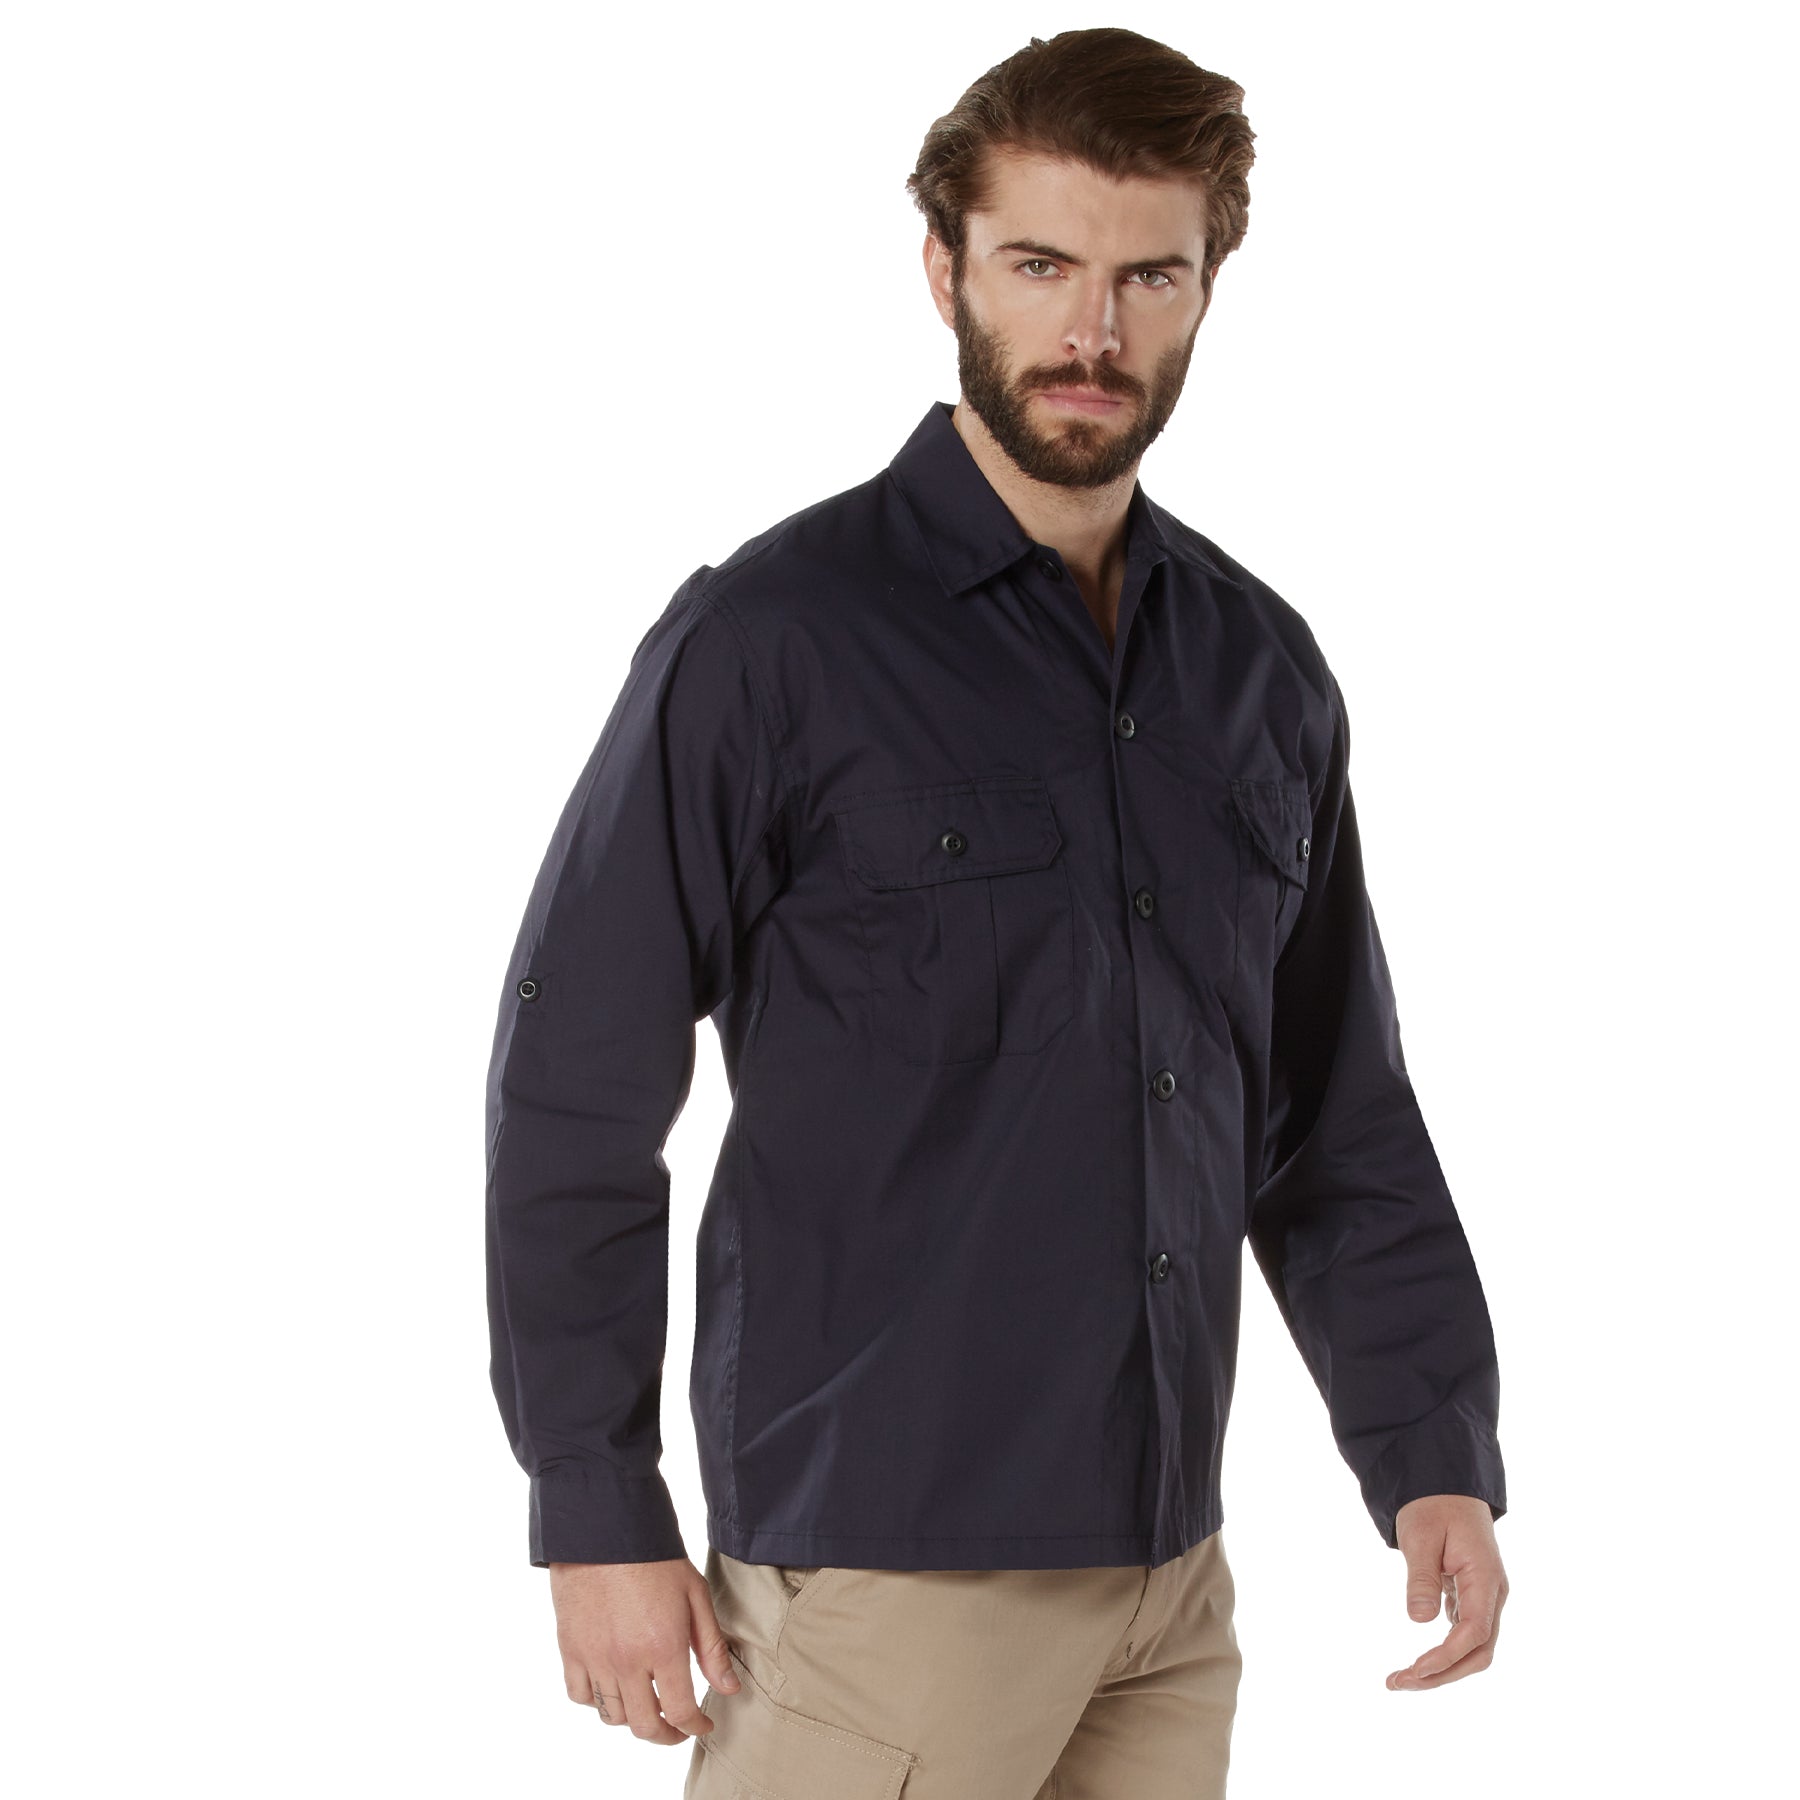 Lightweight Poly/Cotton Rip-Stop Tactical Shirts